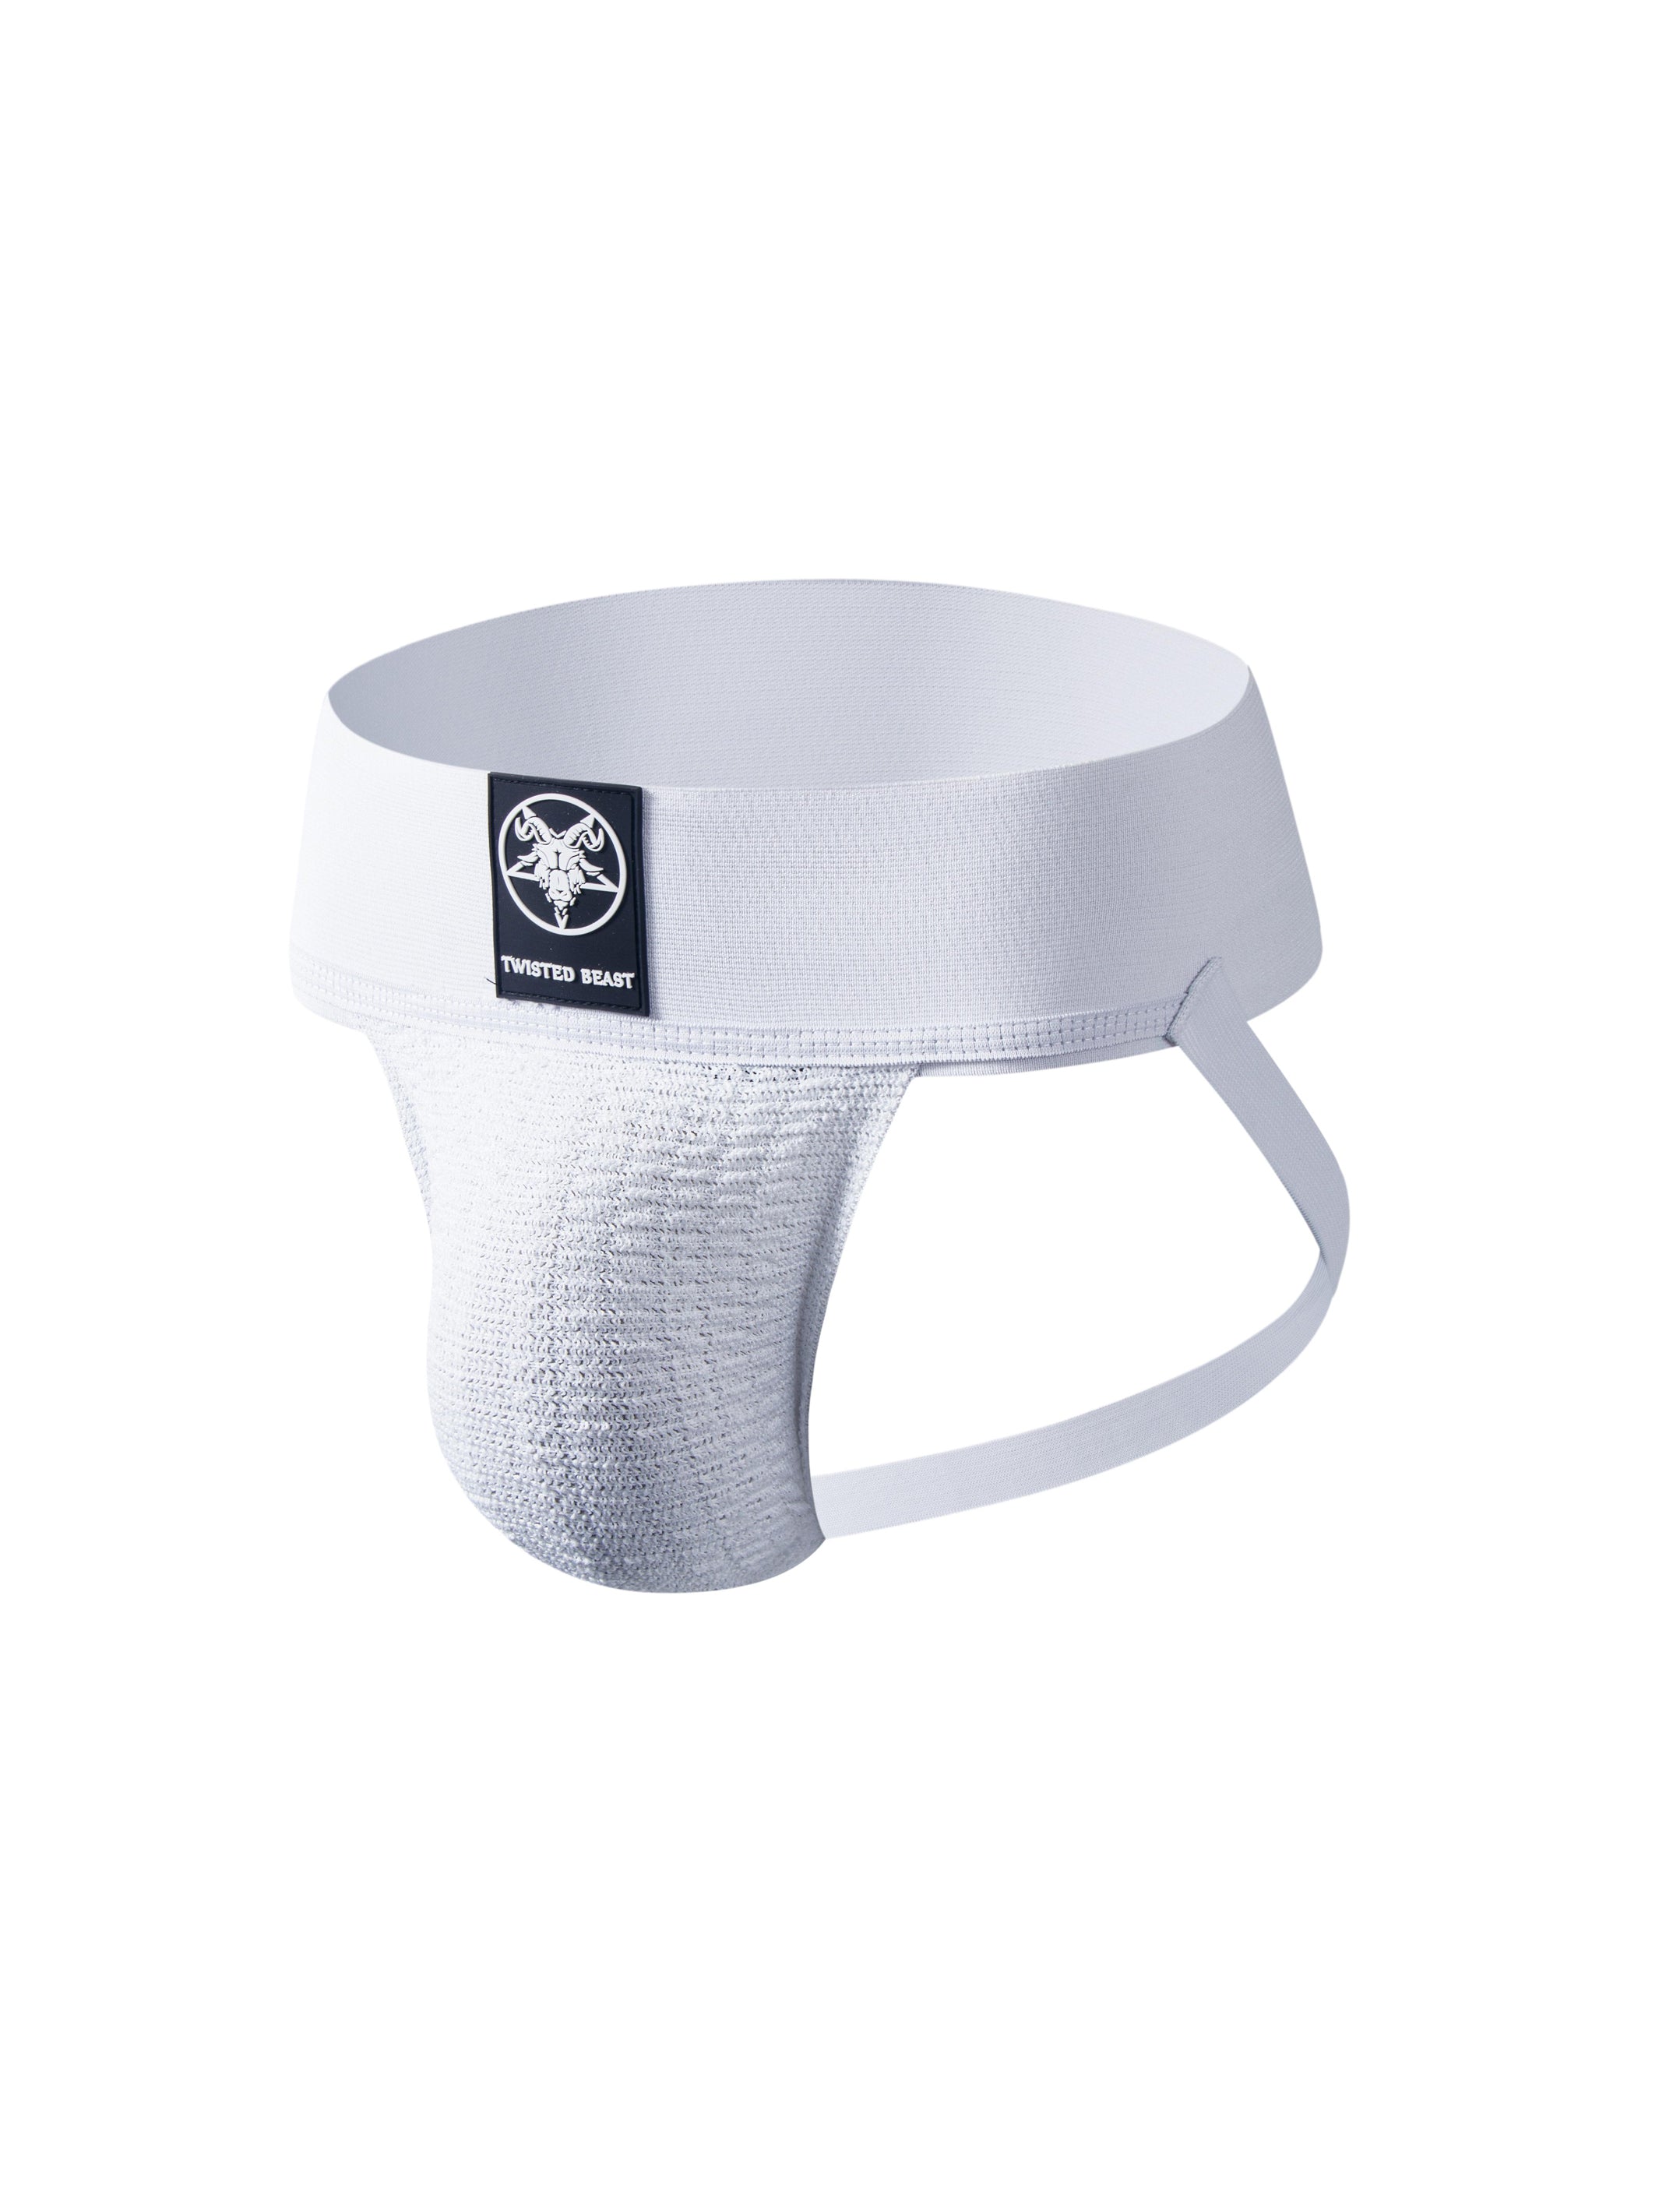 A product photo of a white mesh Locker Jock from the side.